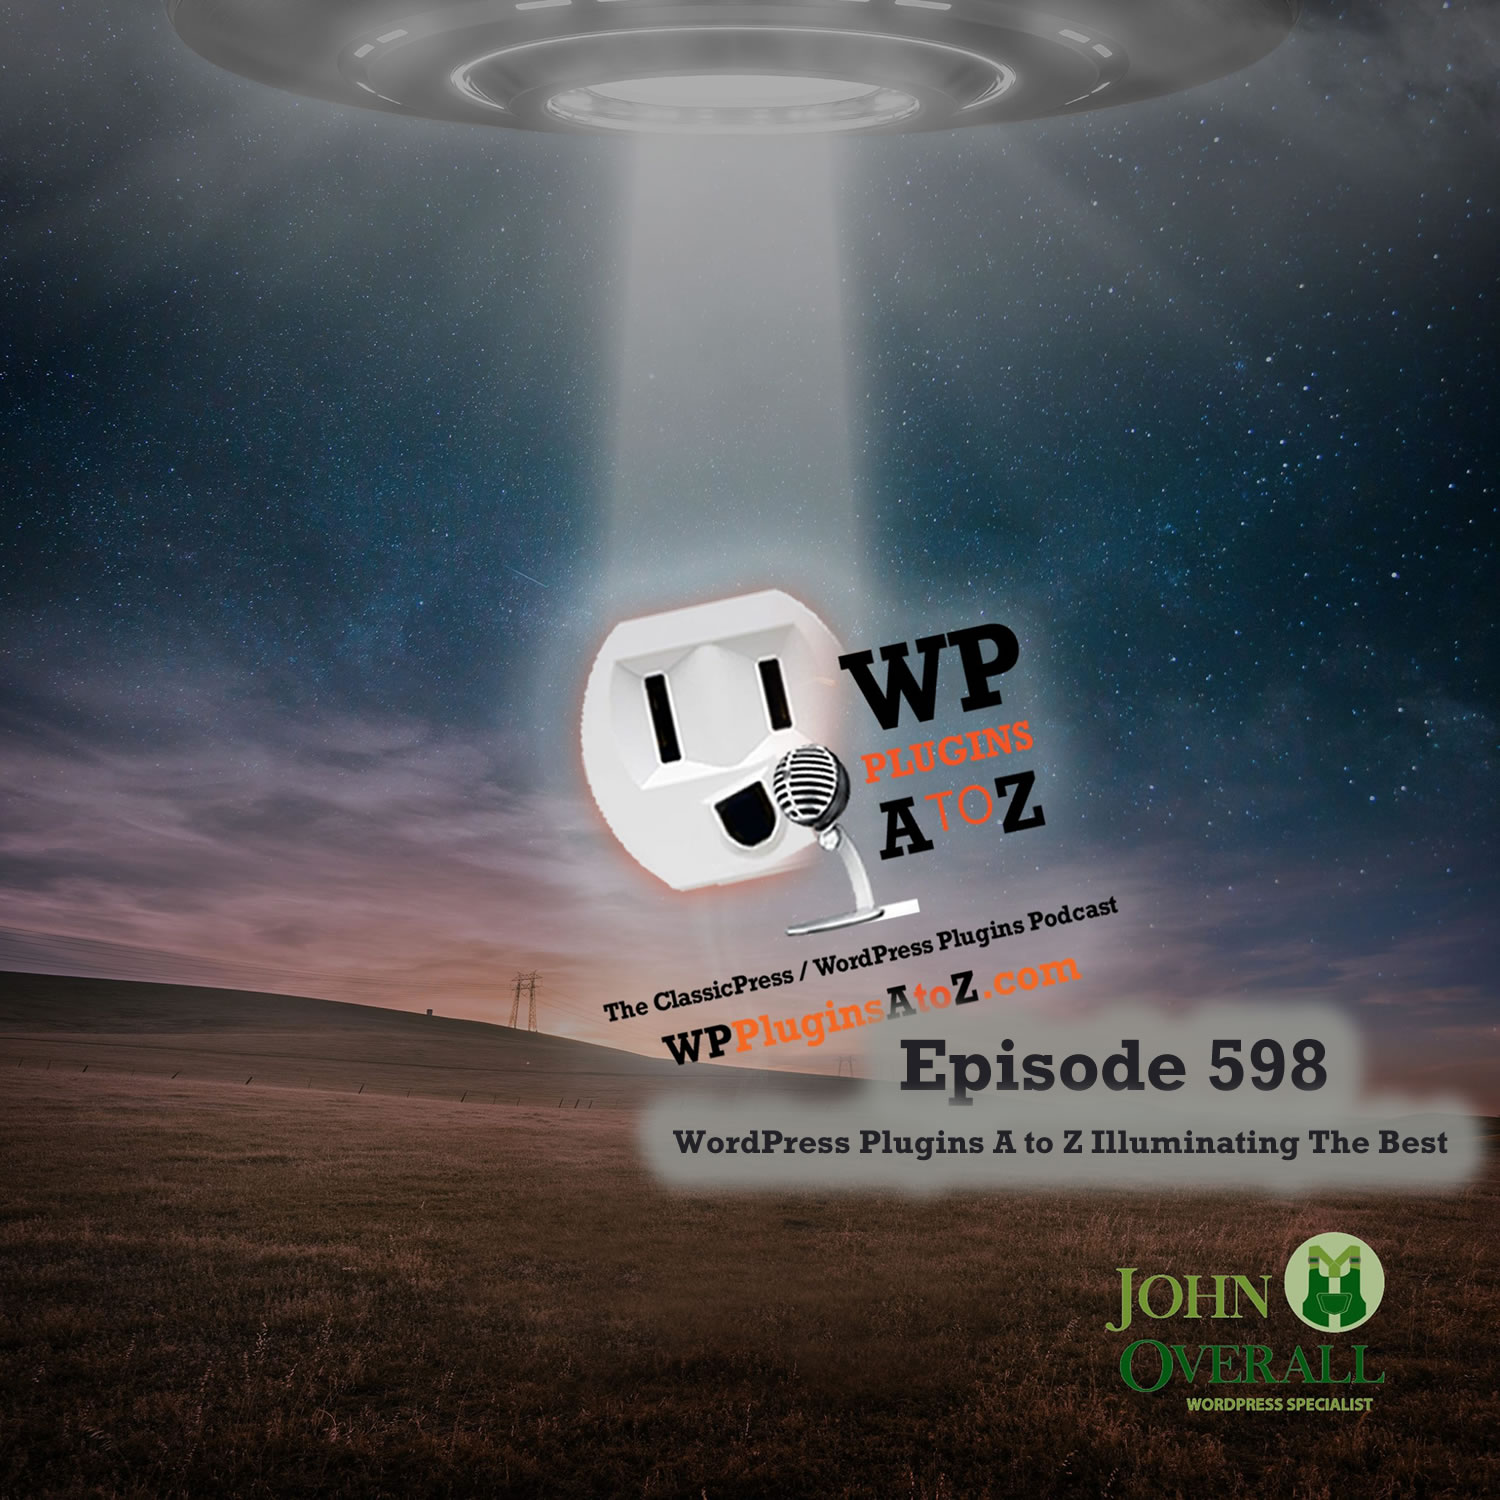 It's Episode 598 and we have plugins for Web Directory Creation, Finding New Plugins... and WordPress News. It's all coming up on WordPress Plugins A-Z!